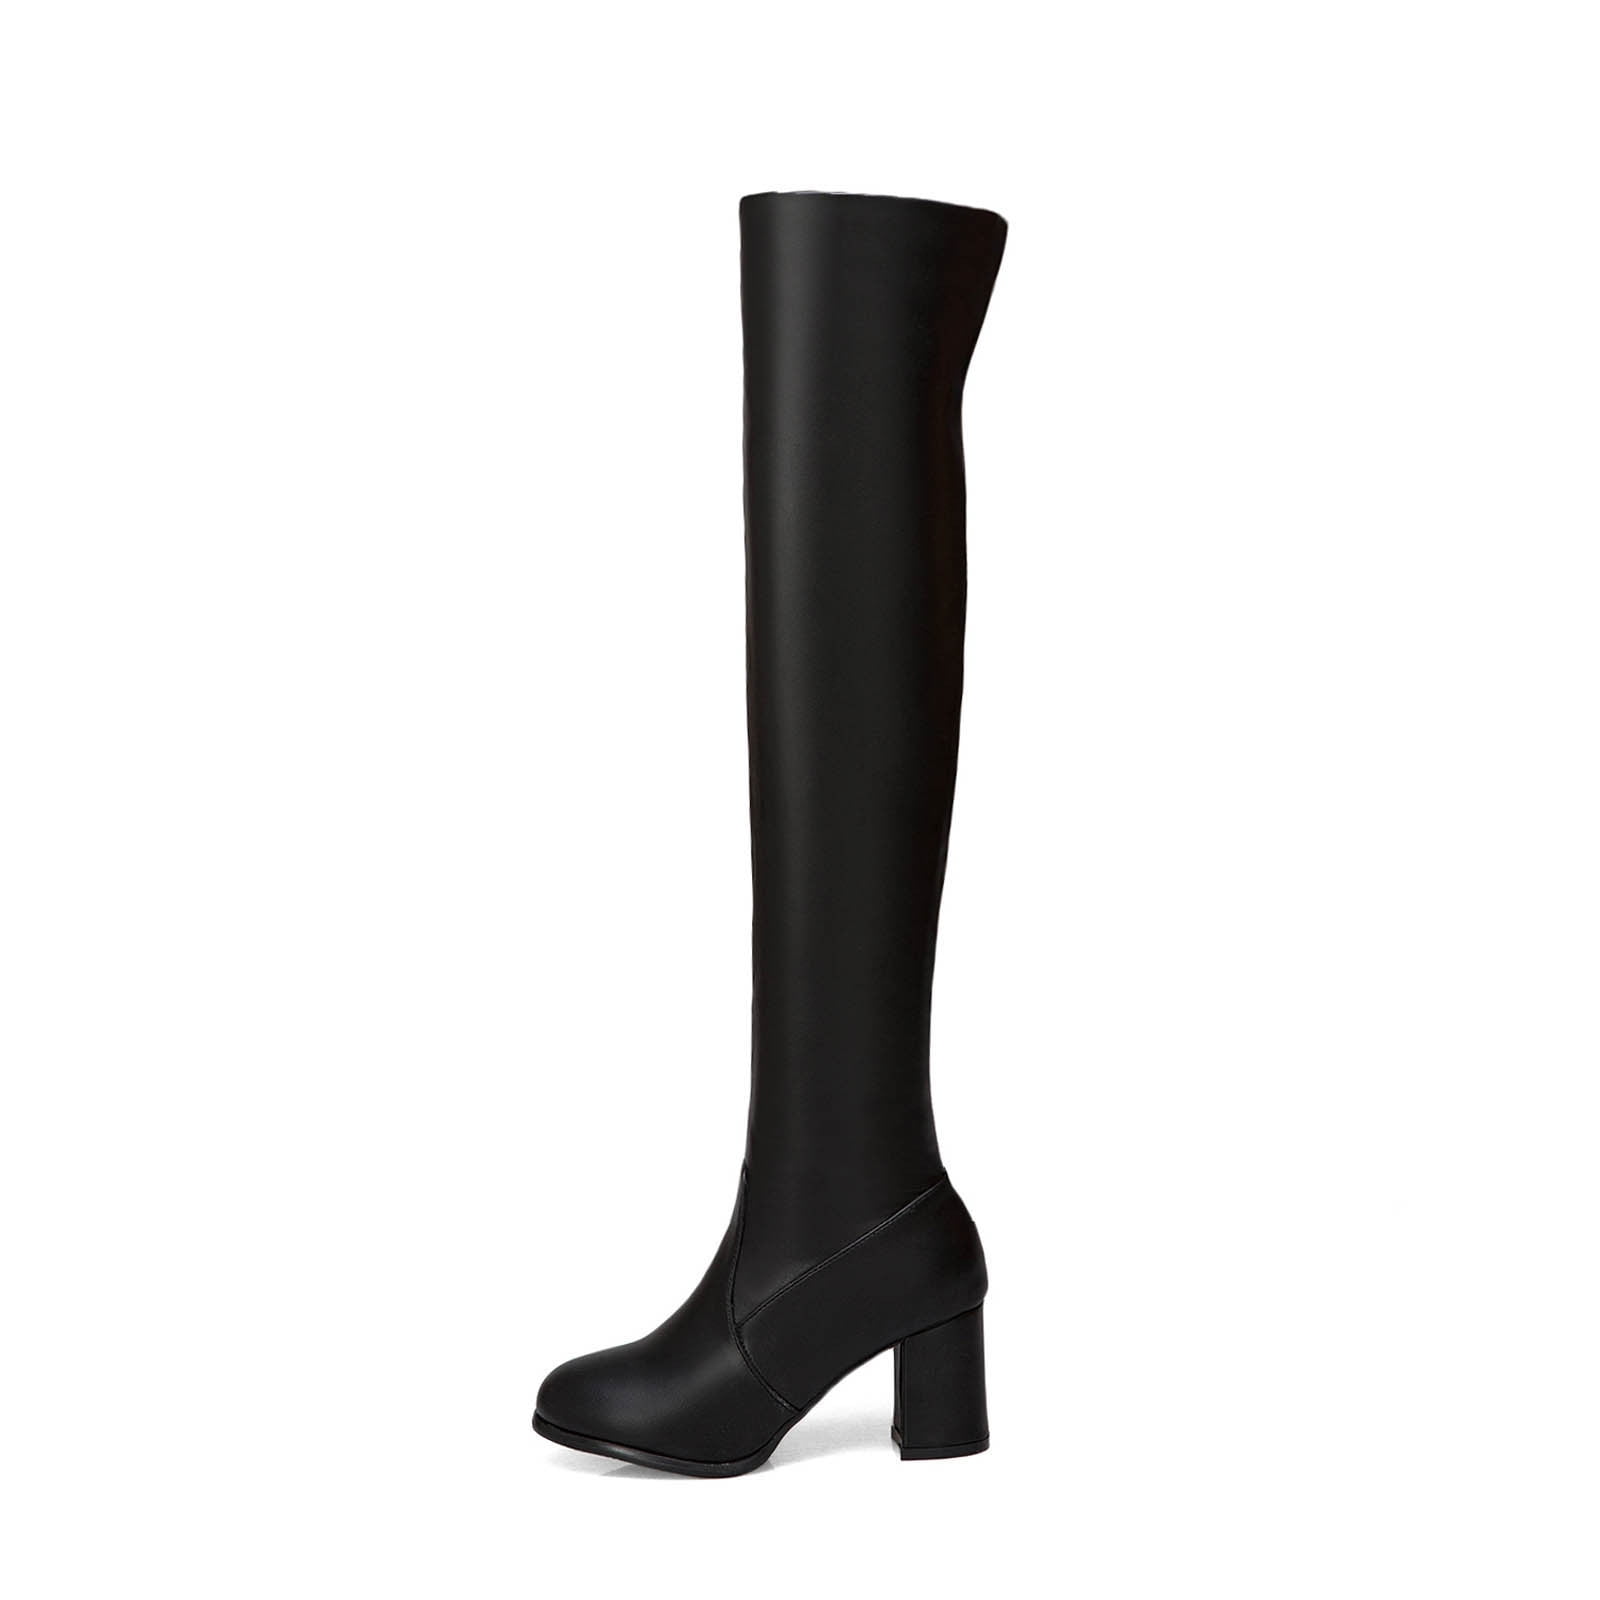 Slim Calf Boots In Women's Boots for sale